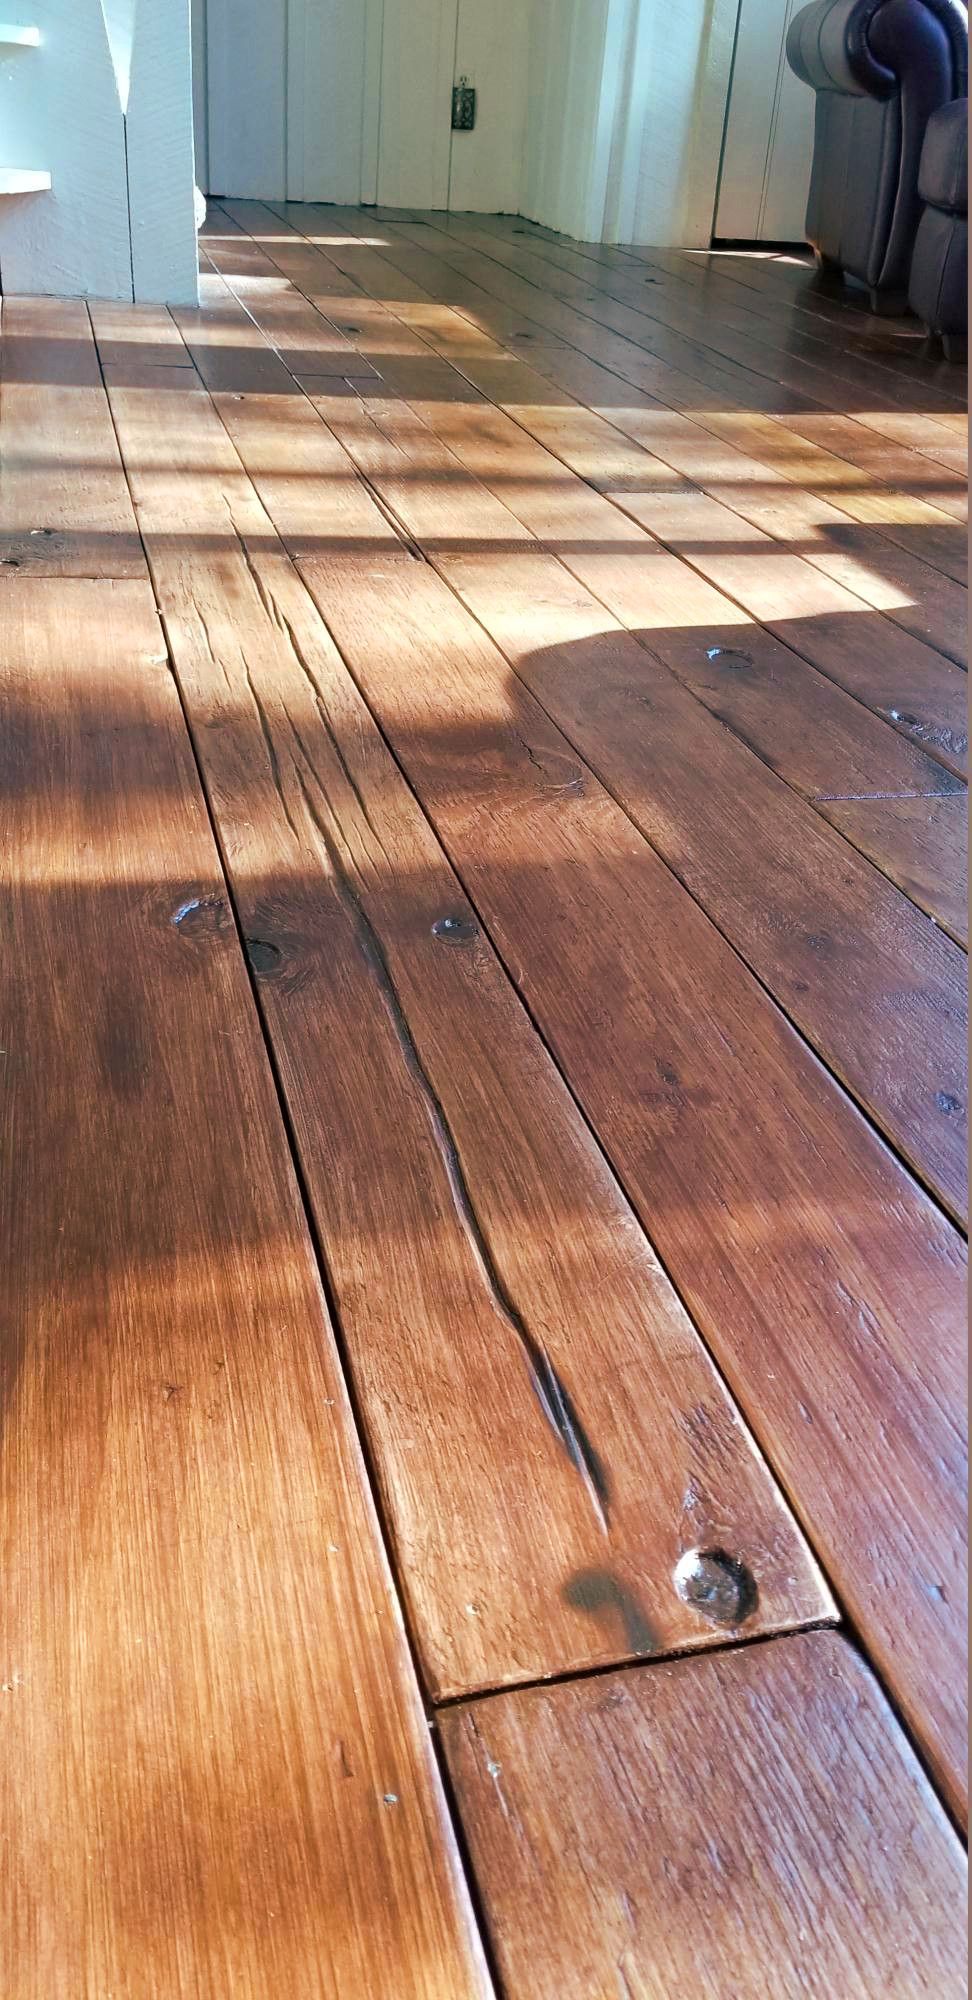 DIY Wide Plank Floors
 DIY Farmhouse Wide Plank Flooring Made From Plywood Our